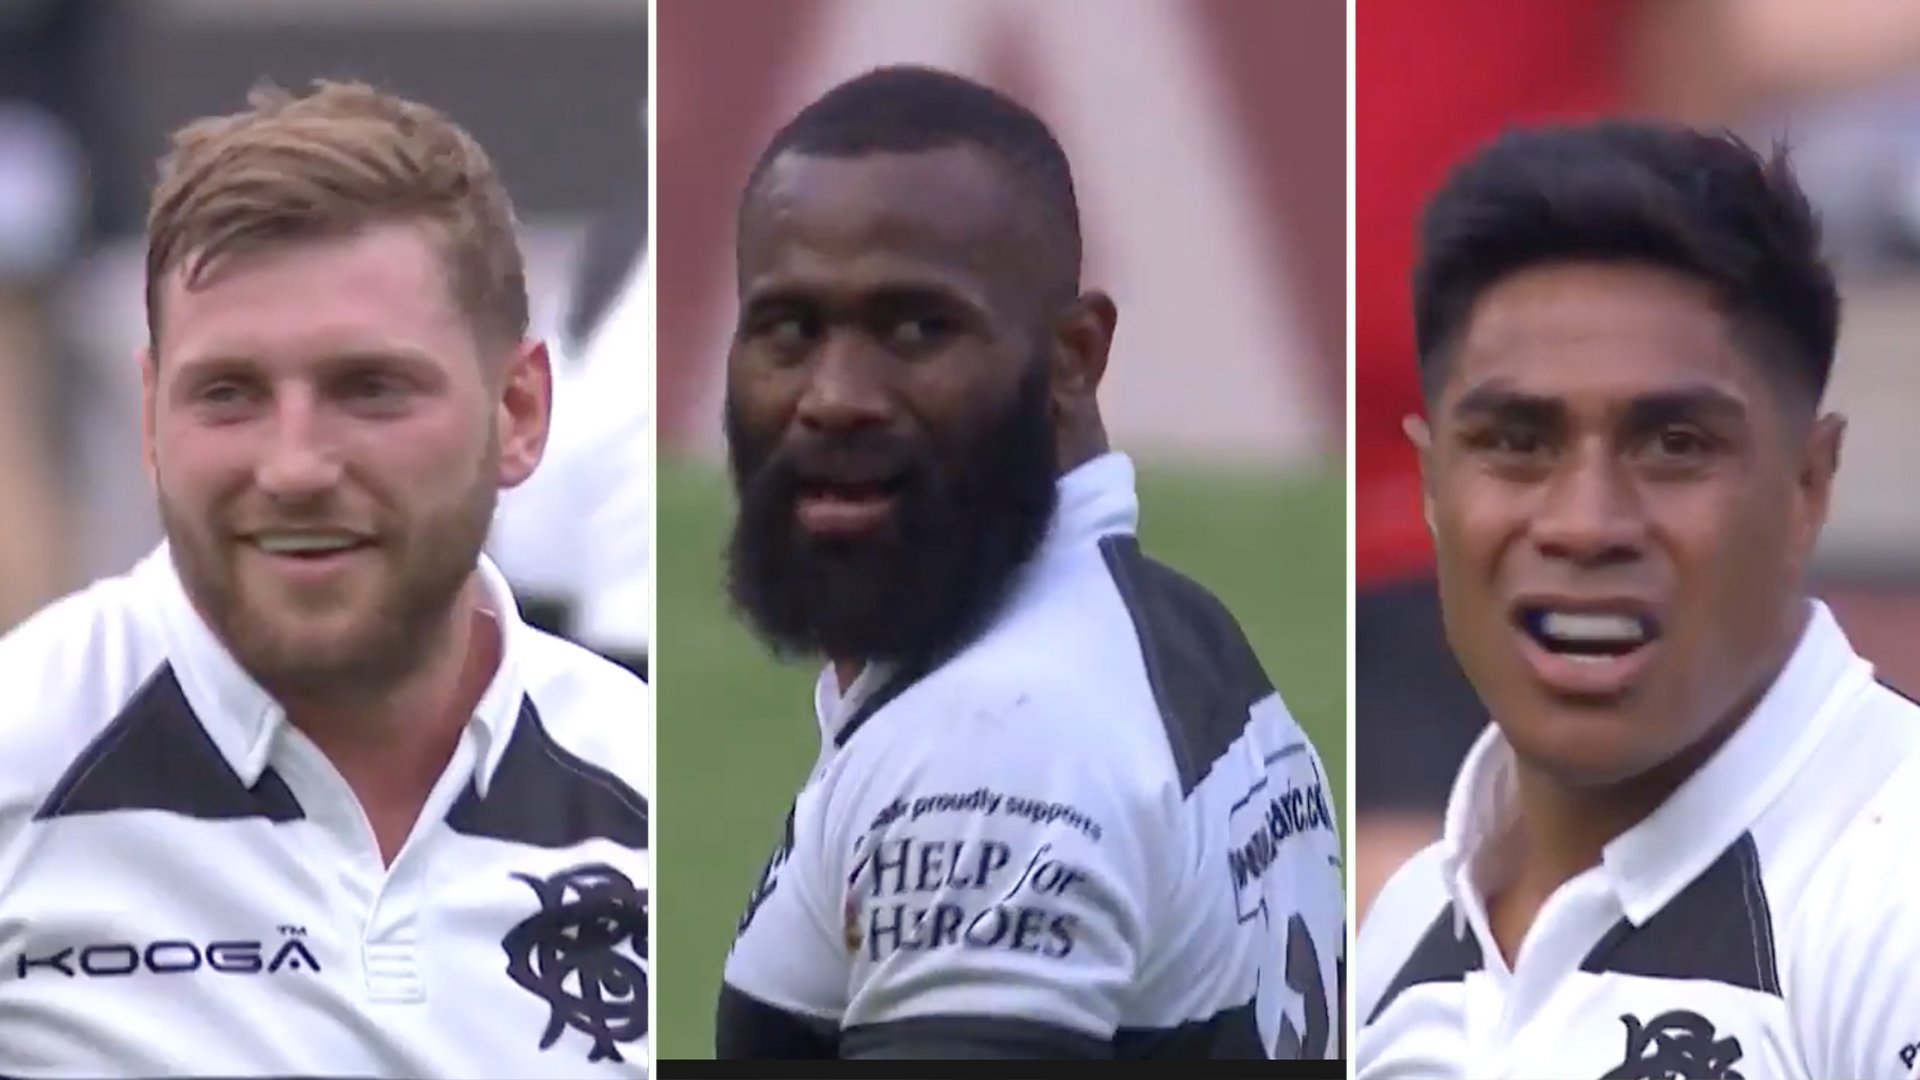 The incredible All Star Barbarians team that embarrassed the England rugby team